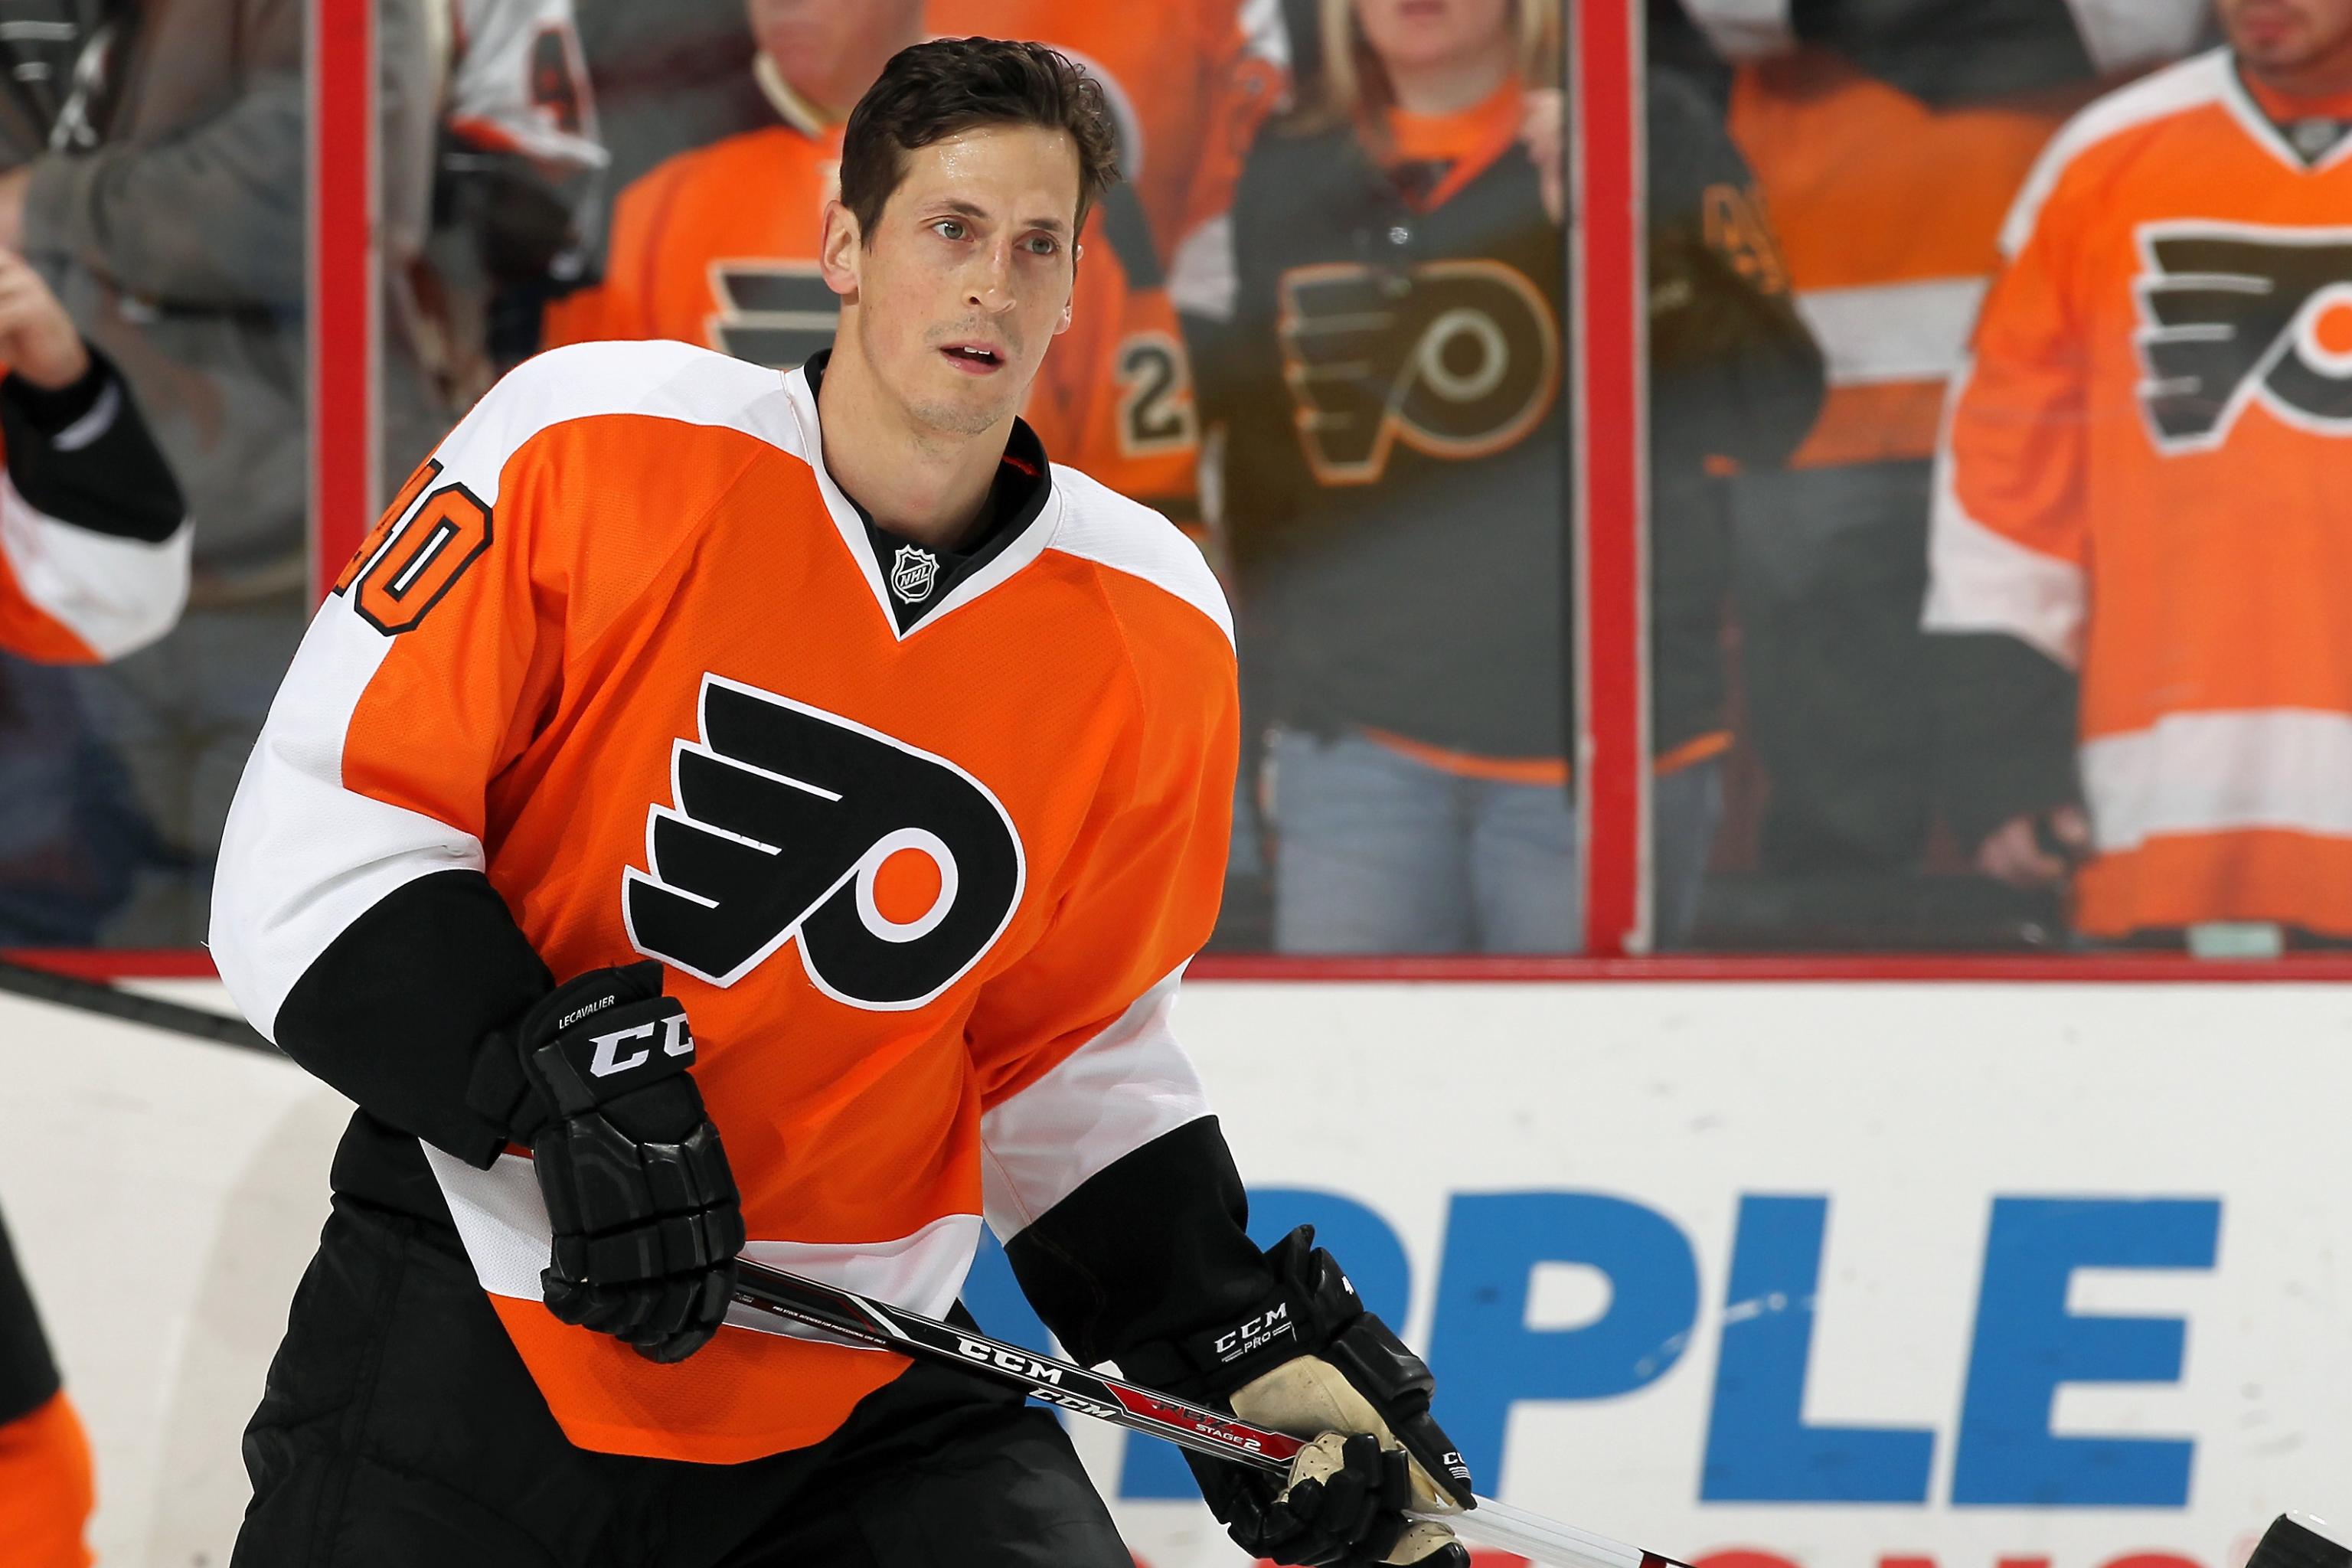 Sportsbash Wednesday: All Over the Vincent Lecavalier Signing